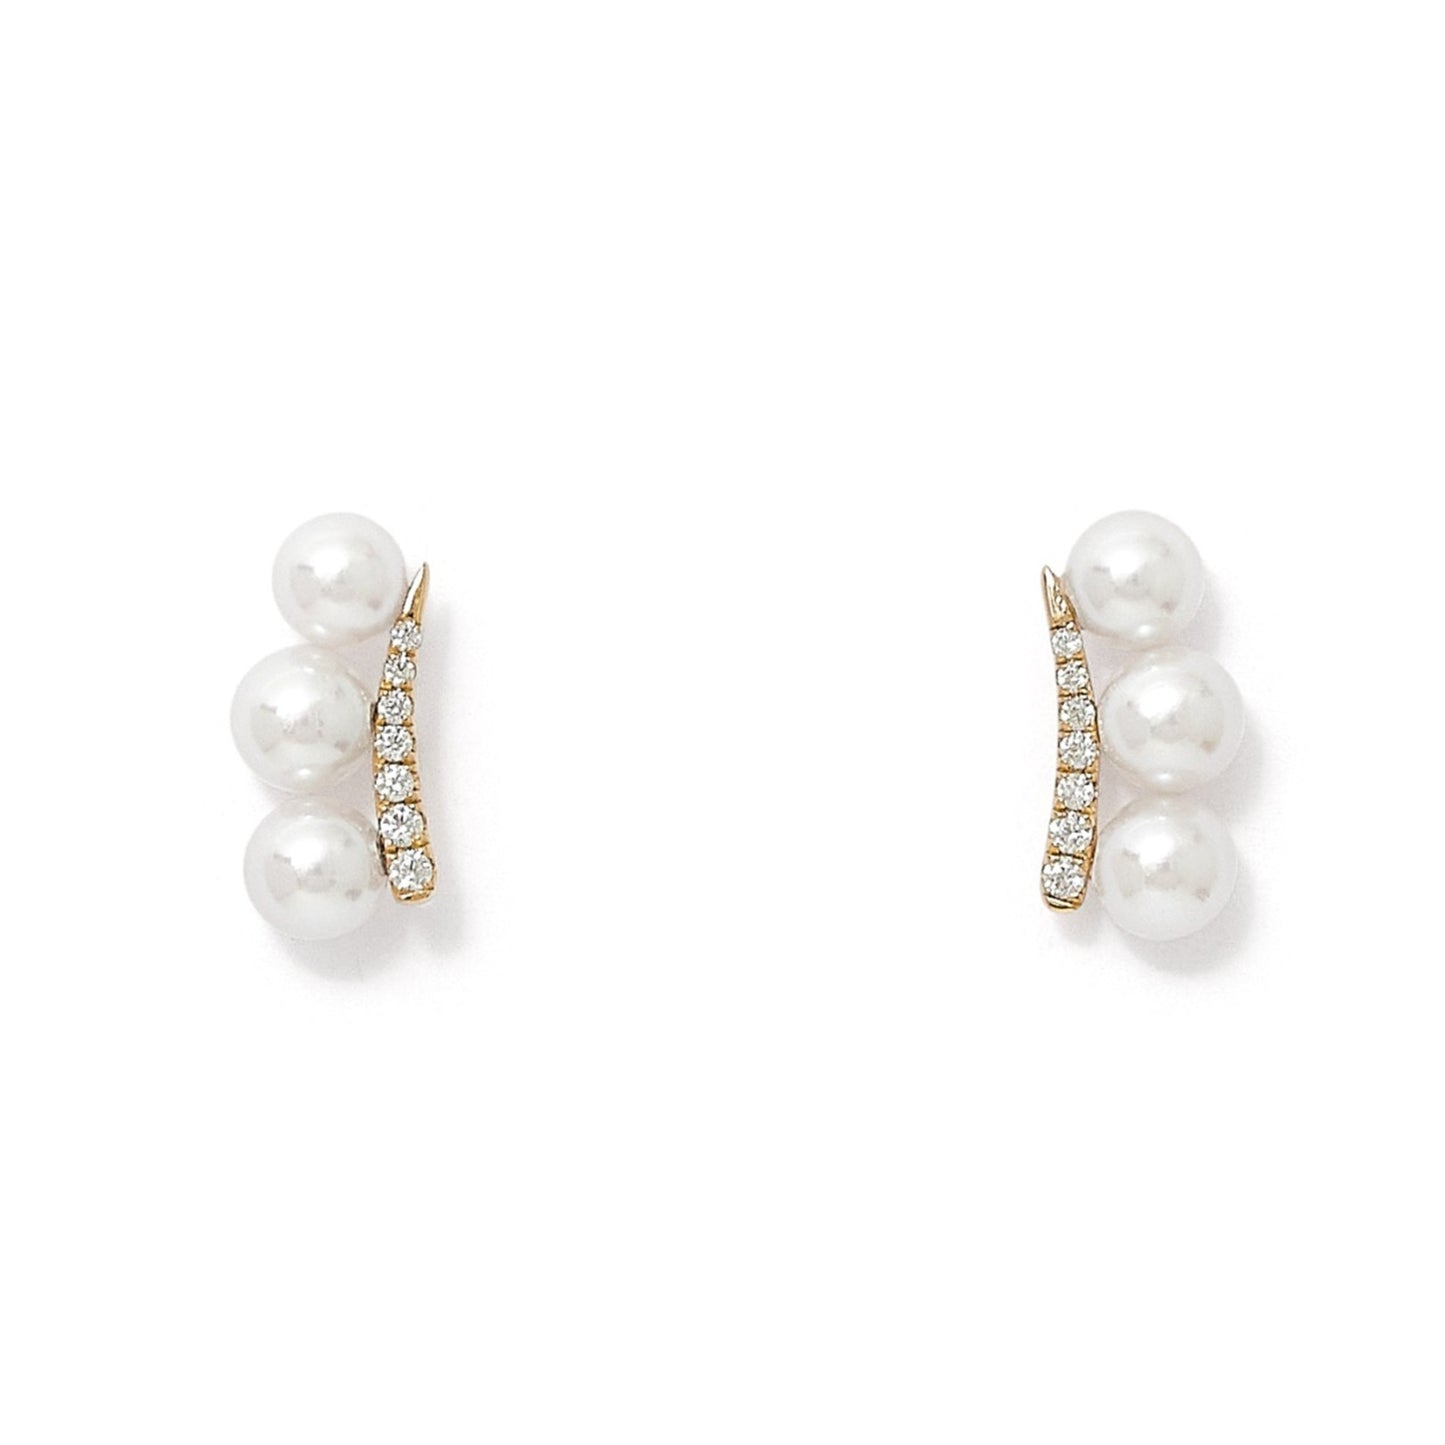 Stella cultured akoya pearl stud earrings with sparkle curve